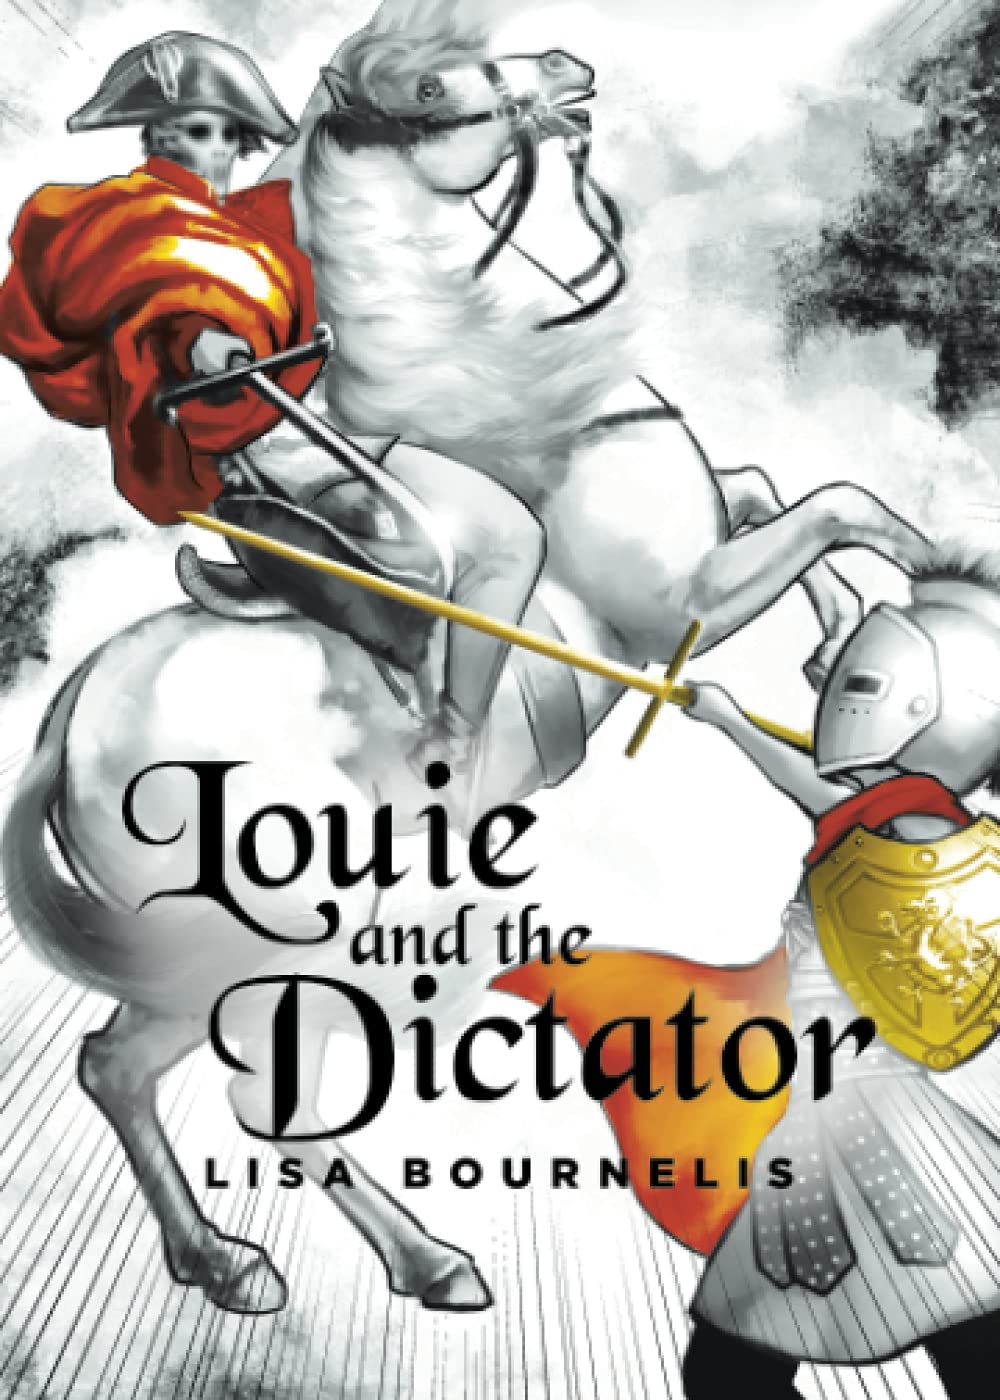 Louie and the Dictator Book Cover